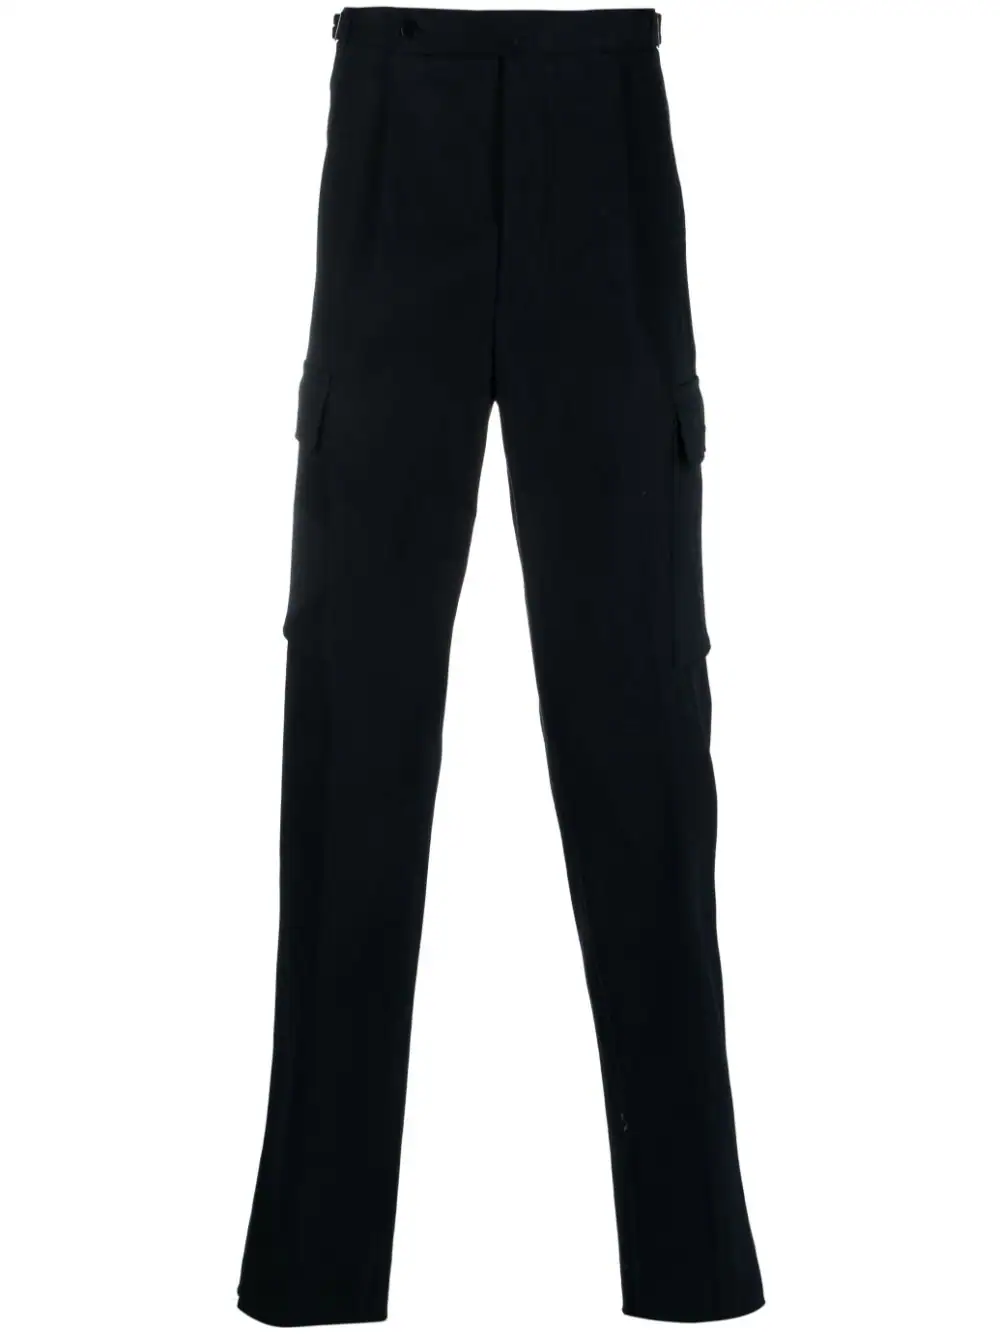 kiton trousers with off-center pleats